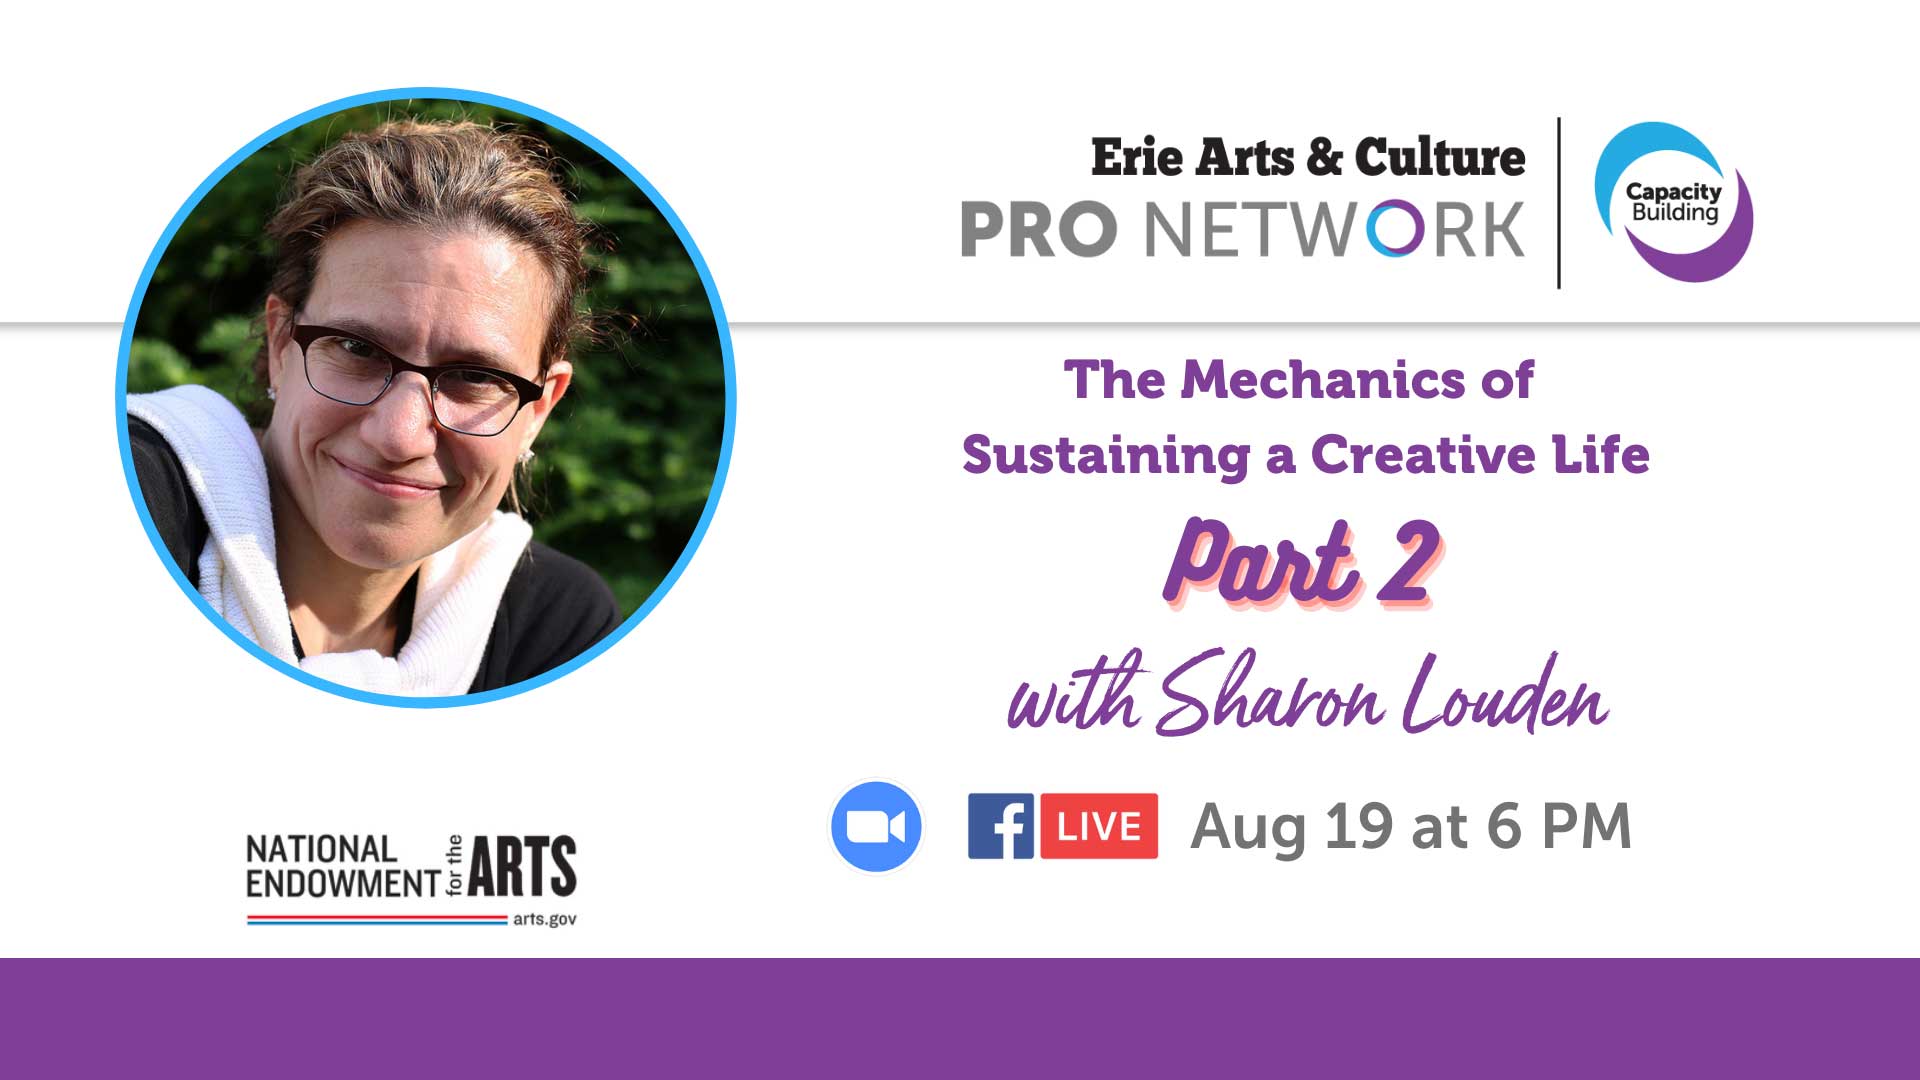 PRO Network: The Mechanics of Sustaining a Creative Life PART 2